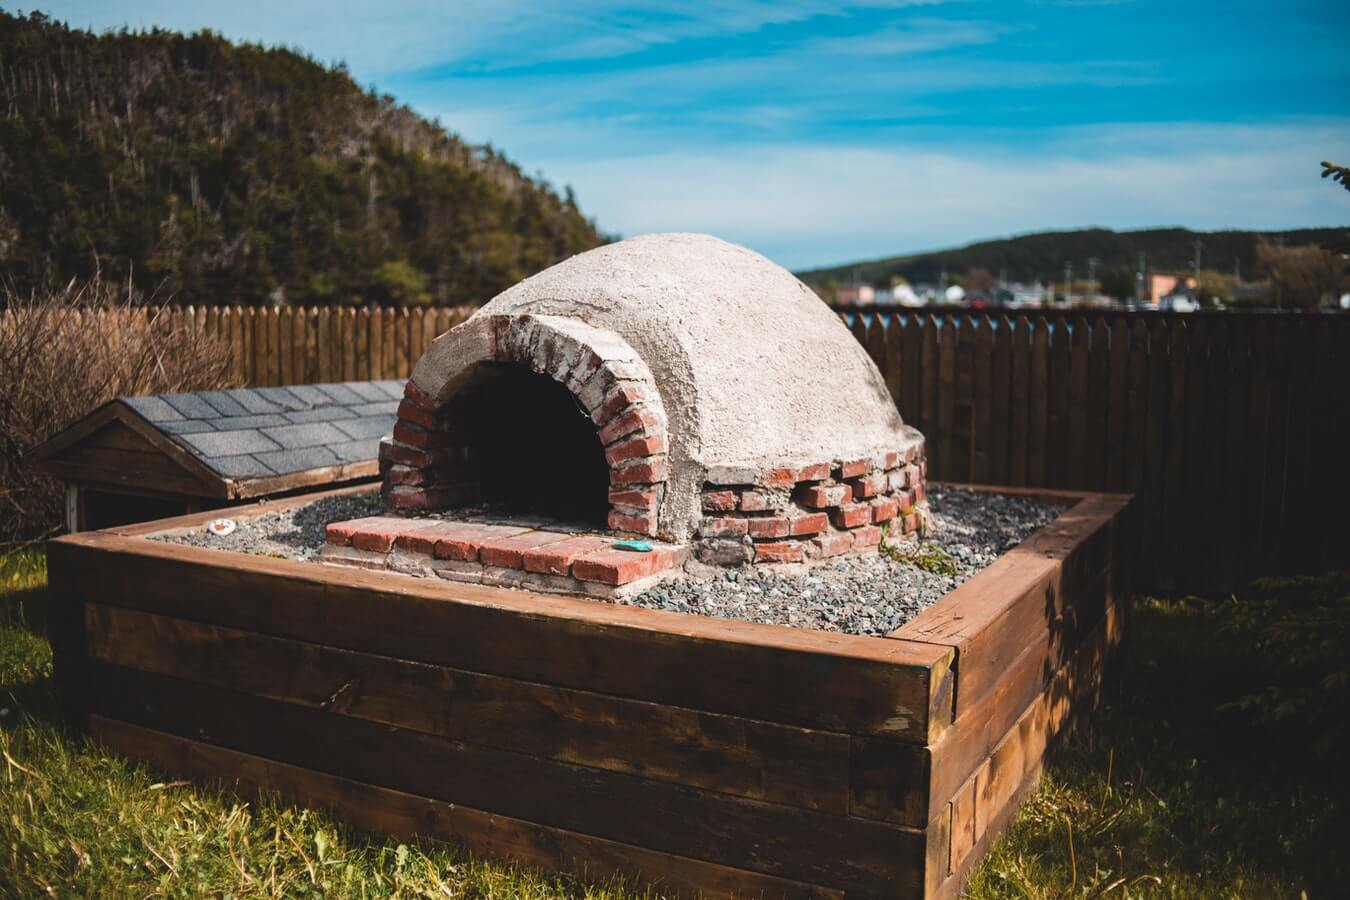 How To Build Brick Pizza Oven Outdoor